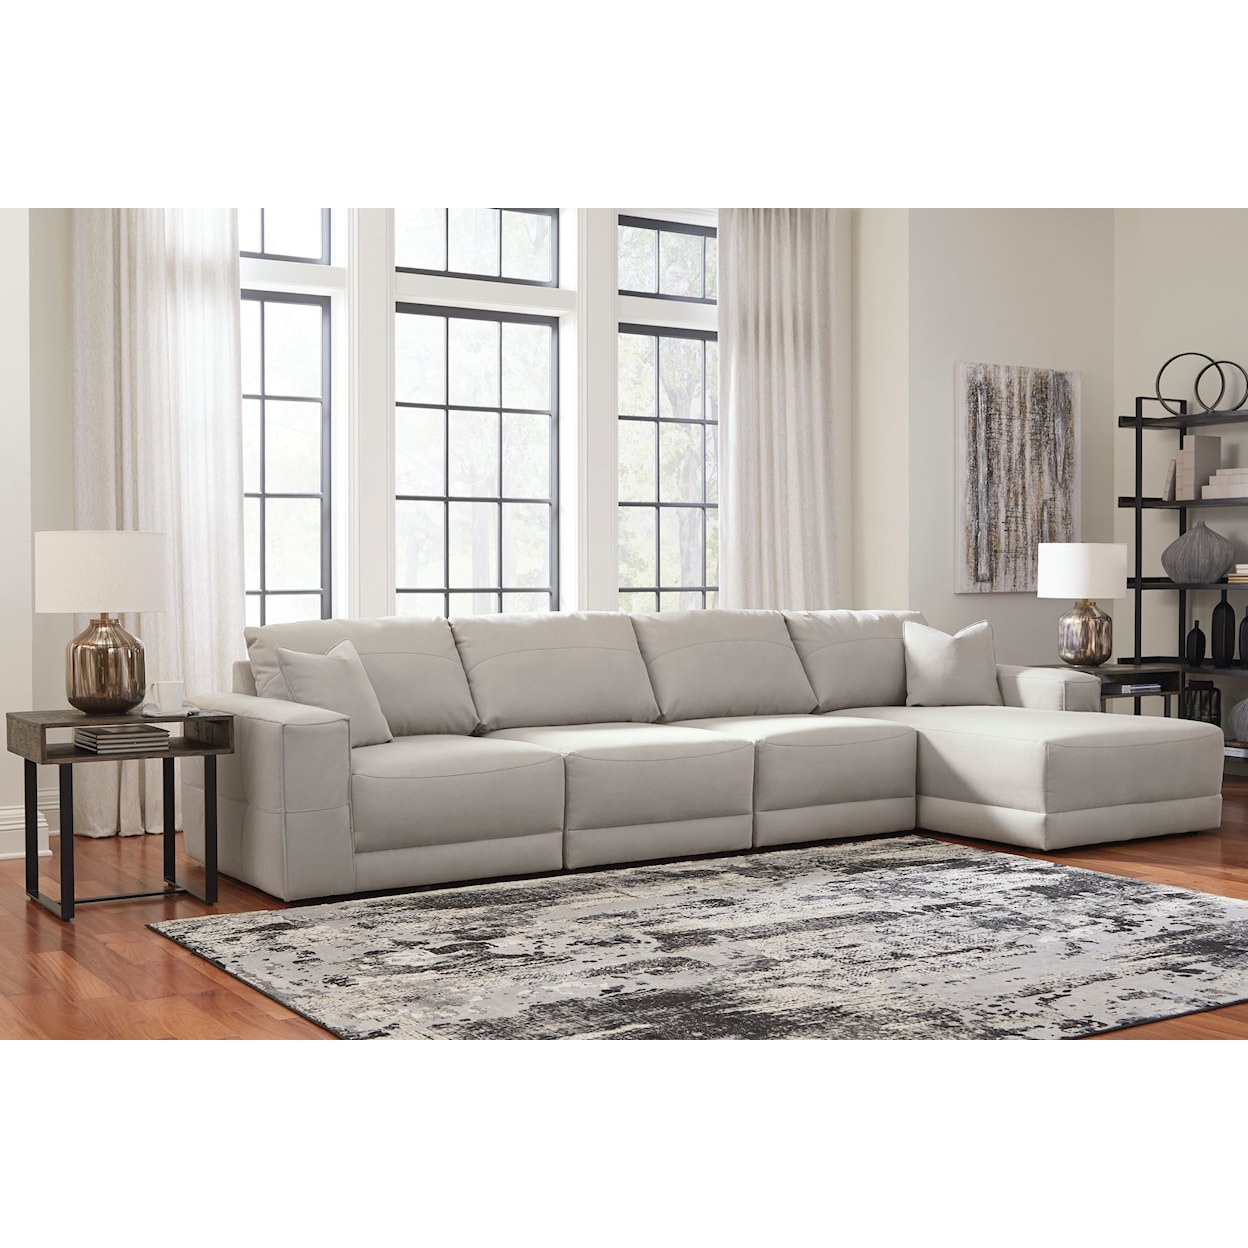 Ashley Next-Gen Gaucho 4-Piece Sectional Sofa with Chaise